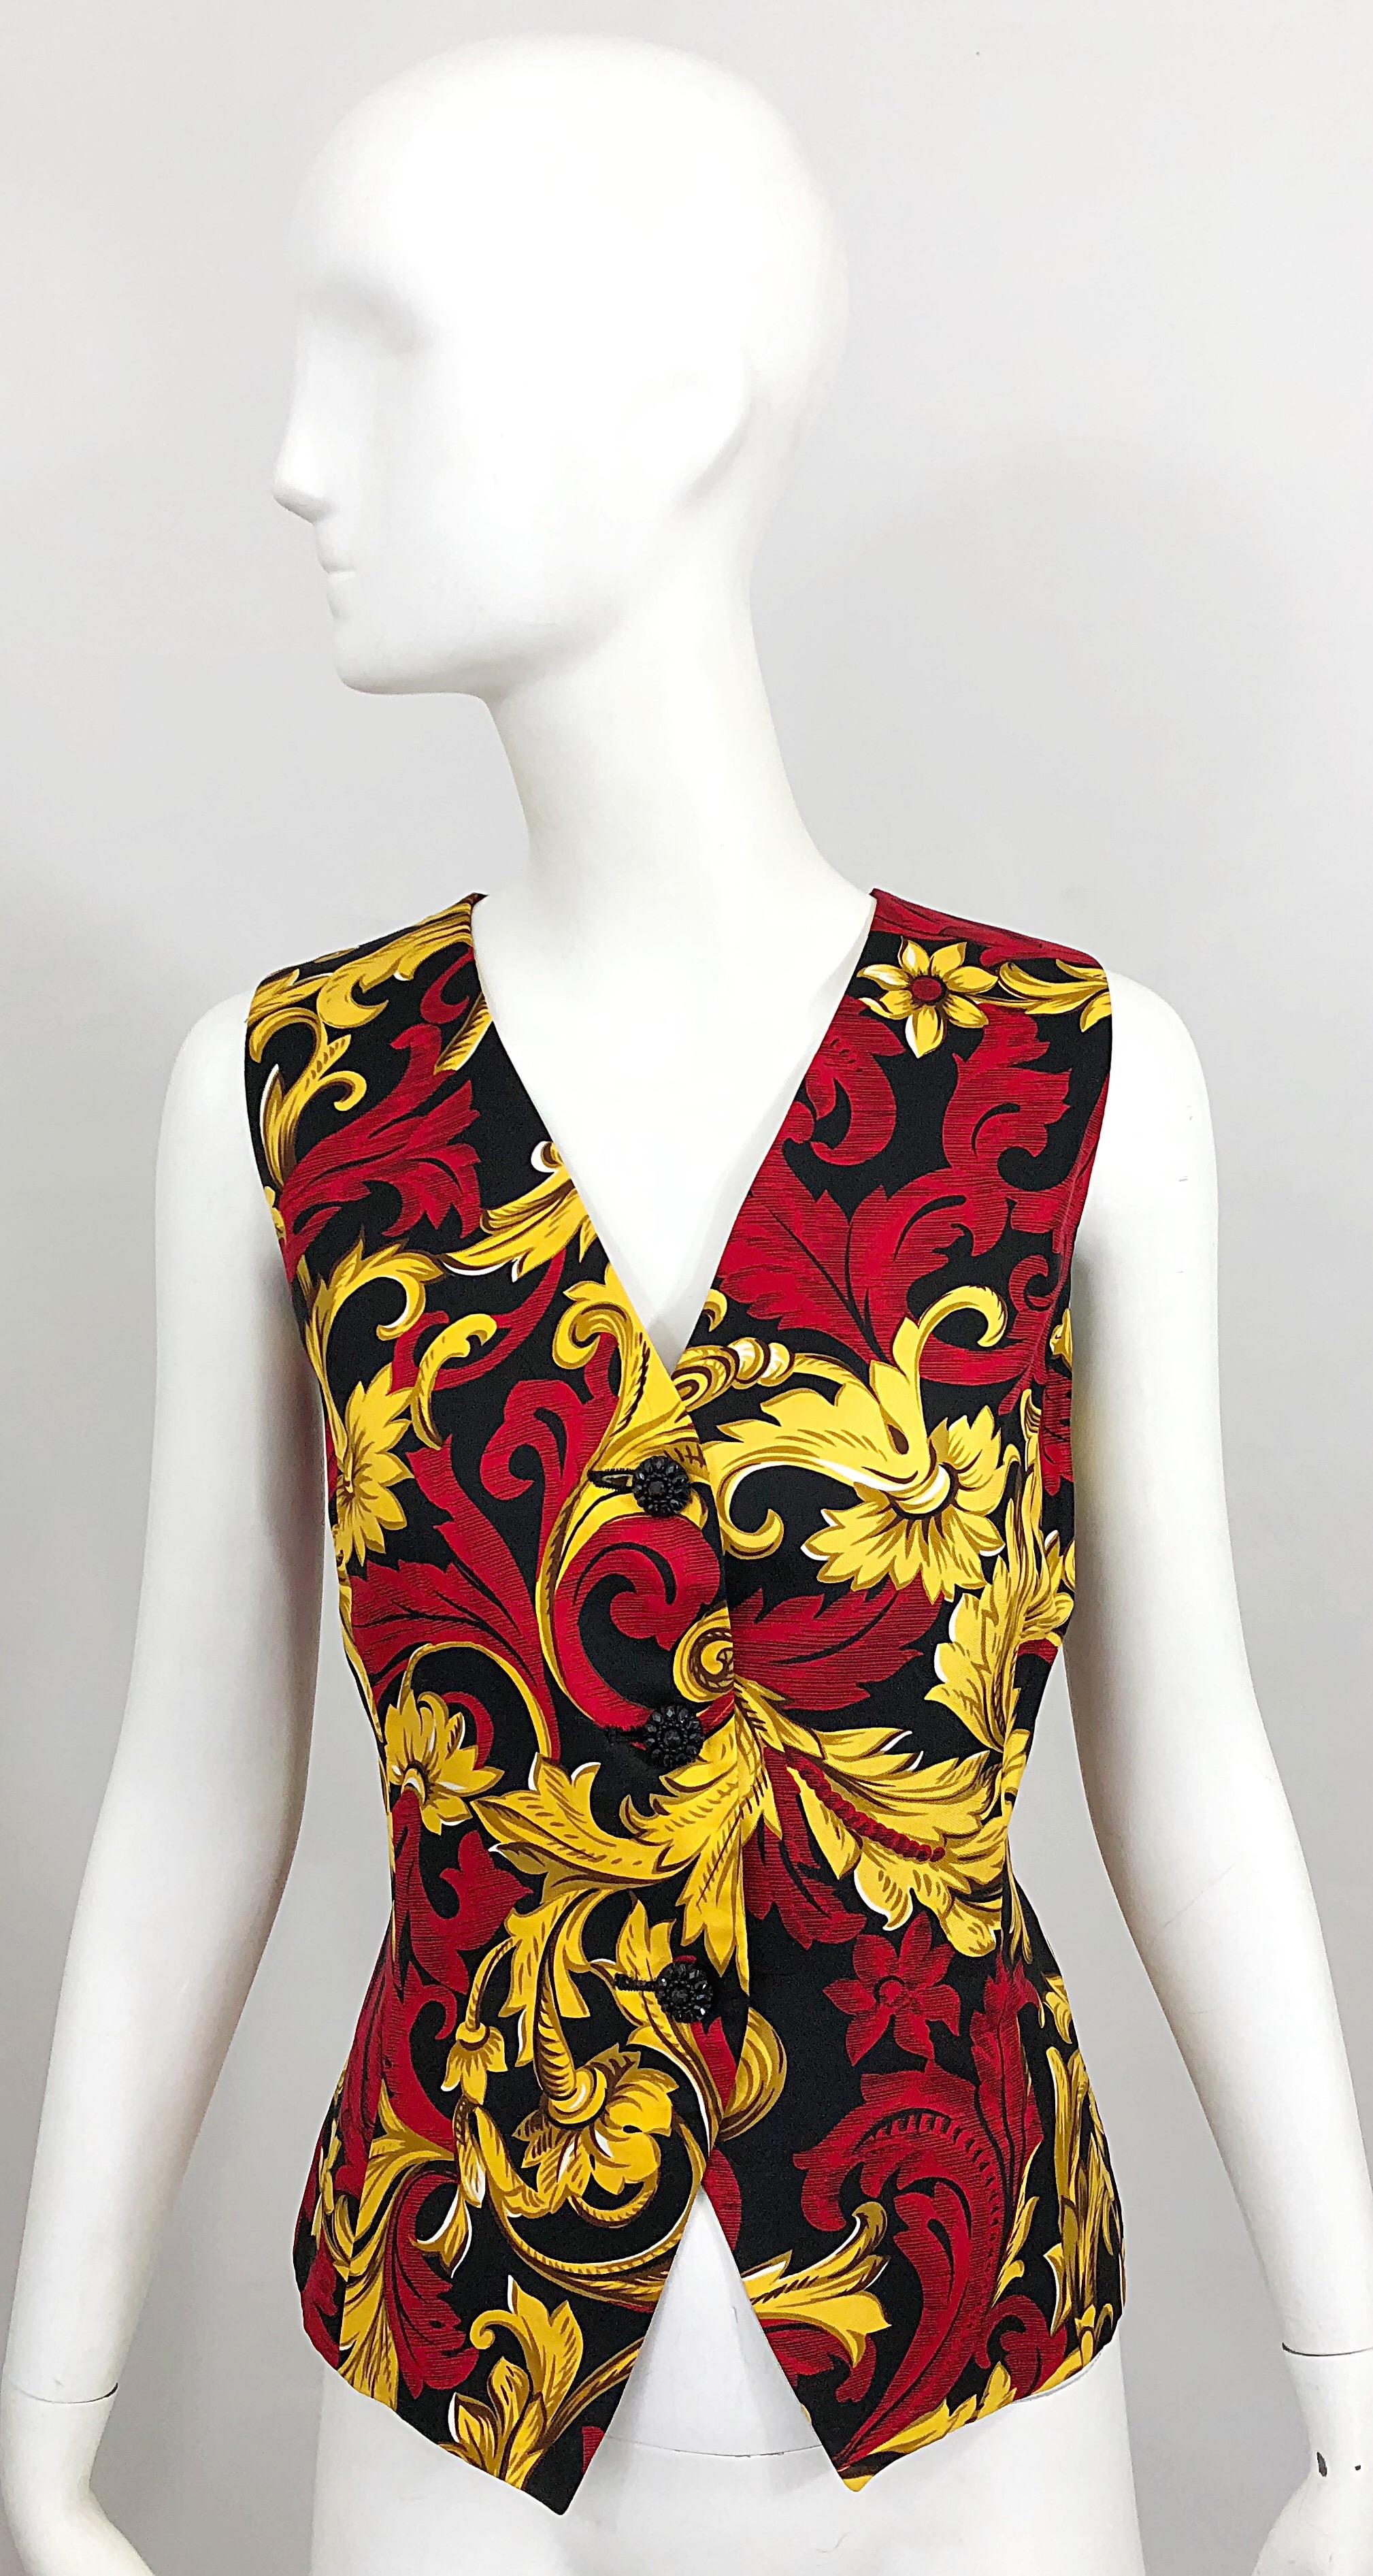 Beautiful vintage women’s CHRISTIAN DIOR 1990s silk Size 10 vest! Bright colors of red, gold and black. Beautiful carved buttons up the front. Great alone with jeans, slacks, or a skirt. Or, can pair over a blouse or turtleneck. In great condition